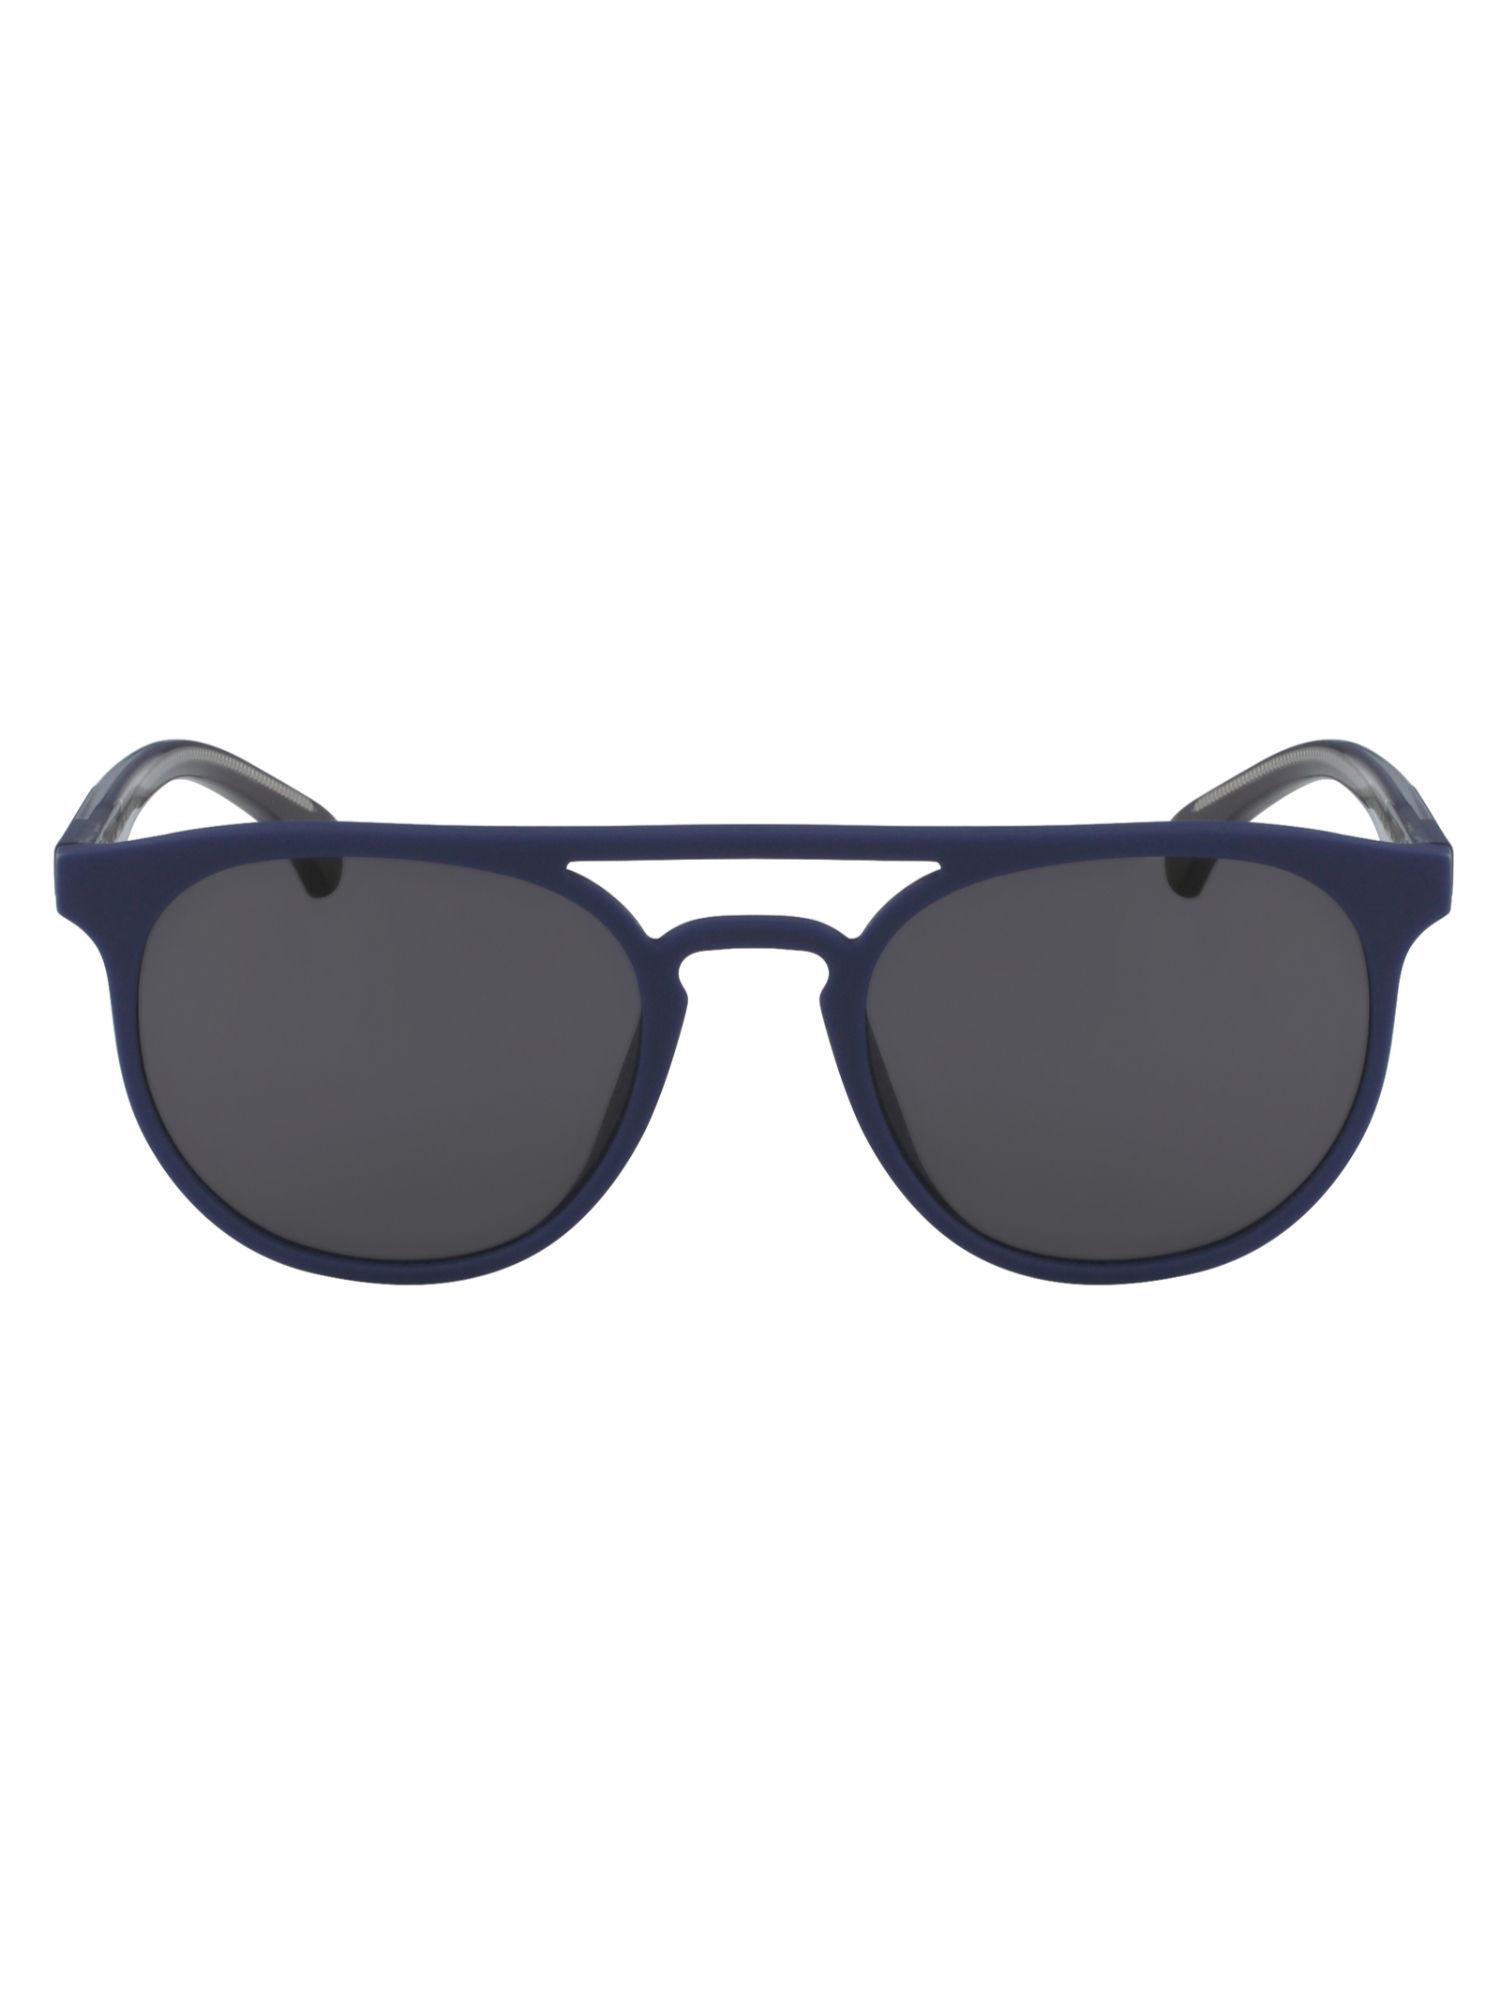 round sunglasses with grey lens for men